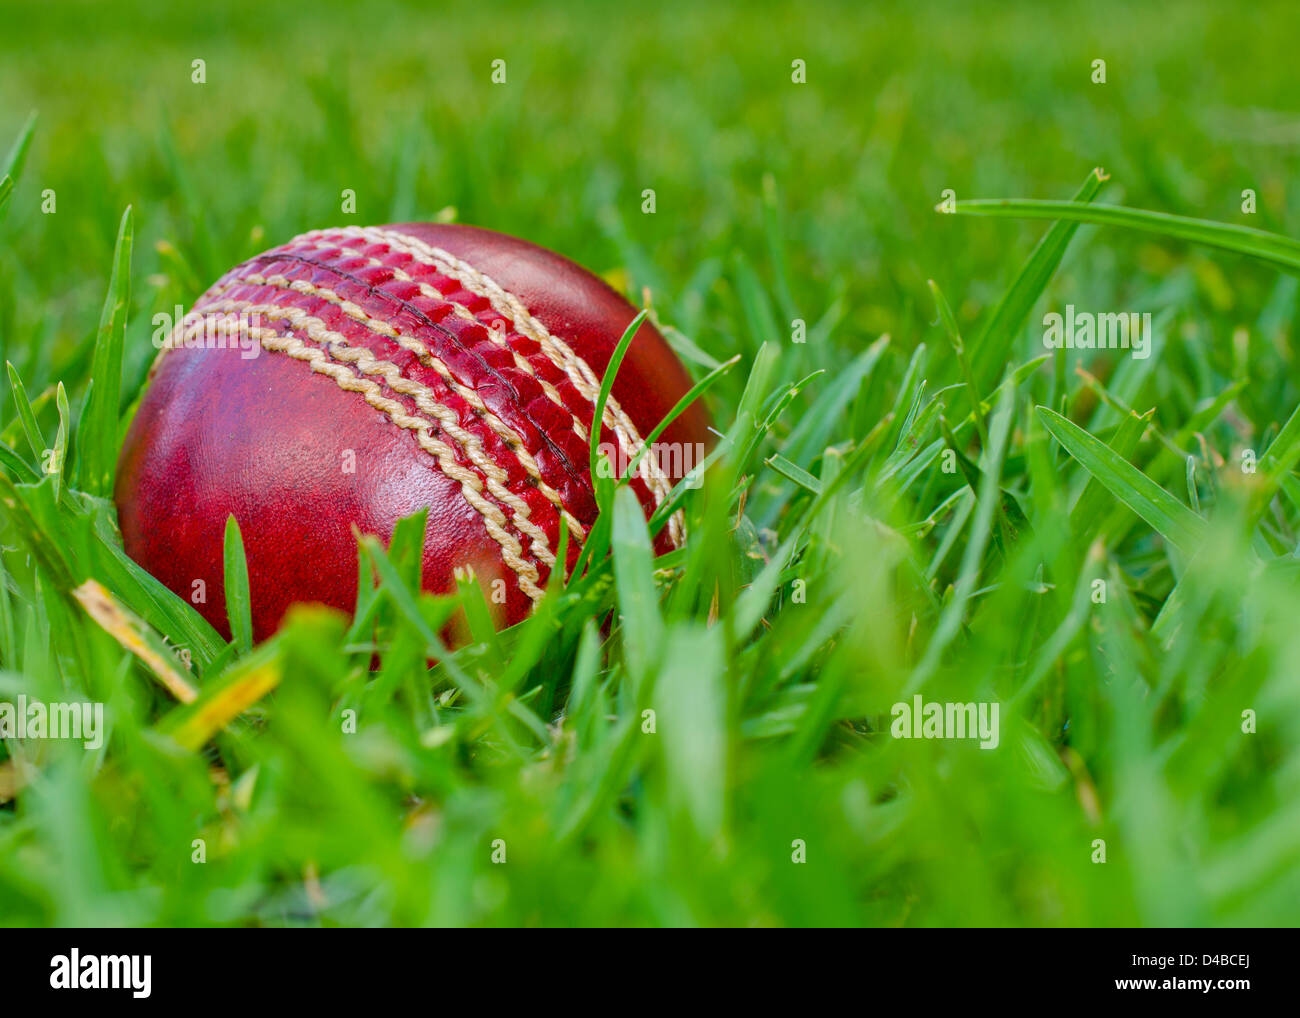 A red cricket ball laying in green grass Stock Photo